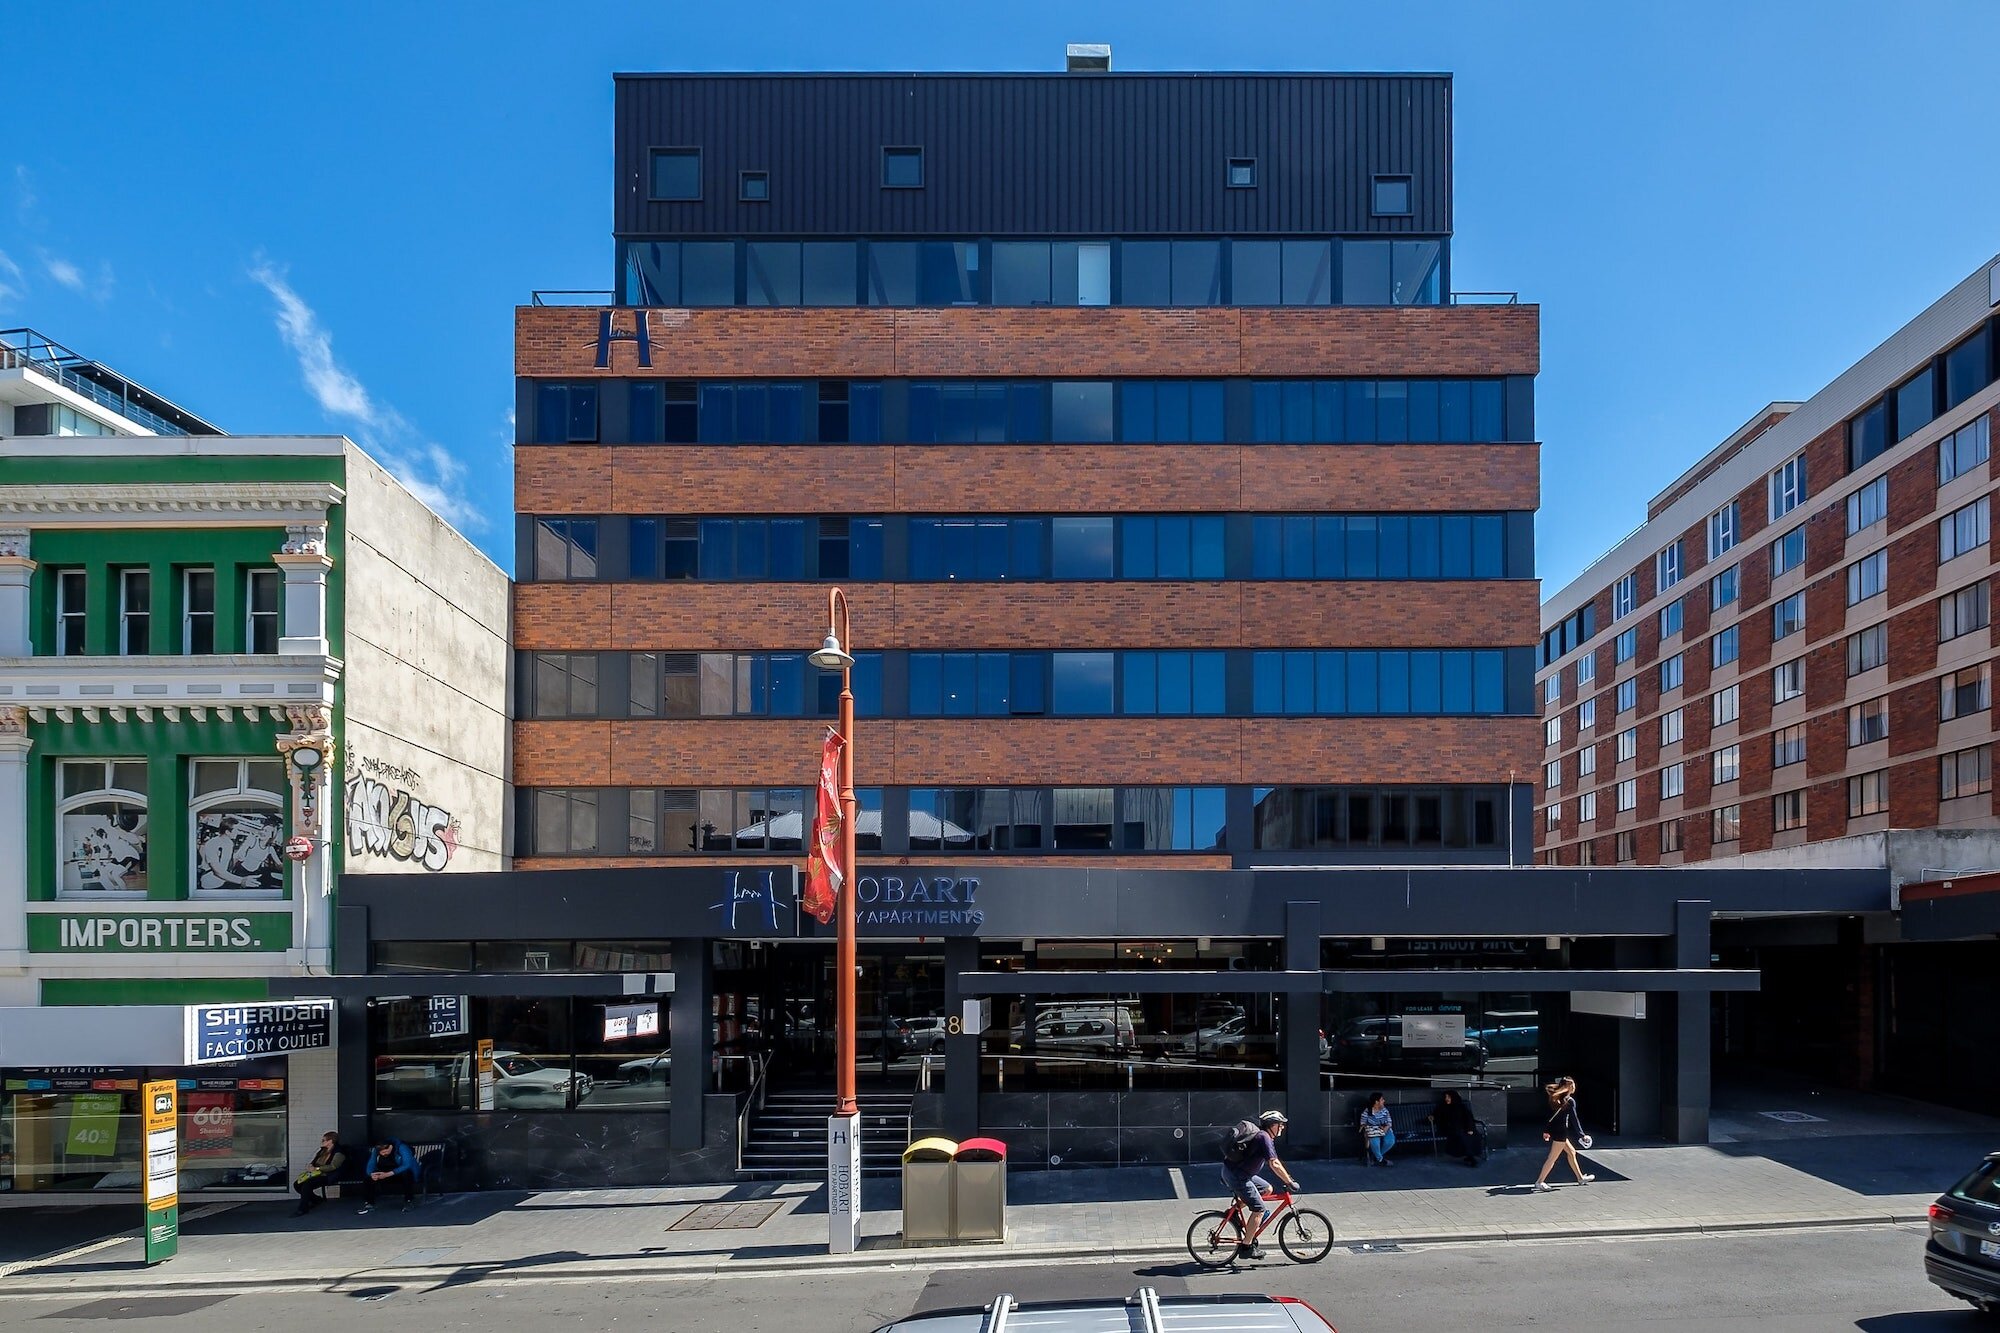 Everything you need in one location.

Experience an urban retreat in the vibrant centre of Hobart City. Our prime location is ideal for holidaymakers and business guests seeking high-quality accommodation with easy access to the best that Hobart has 